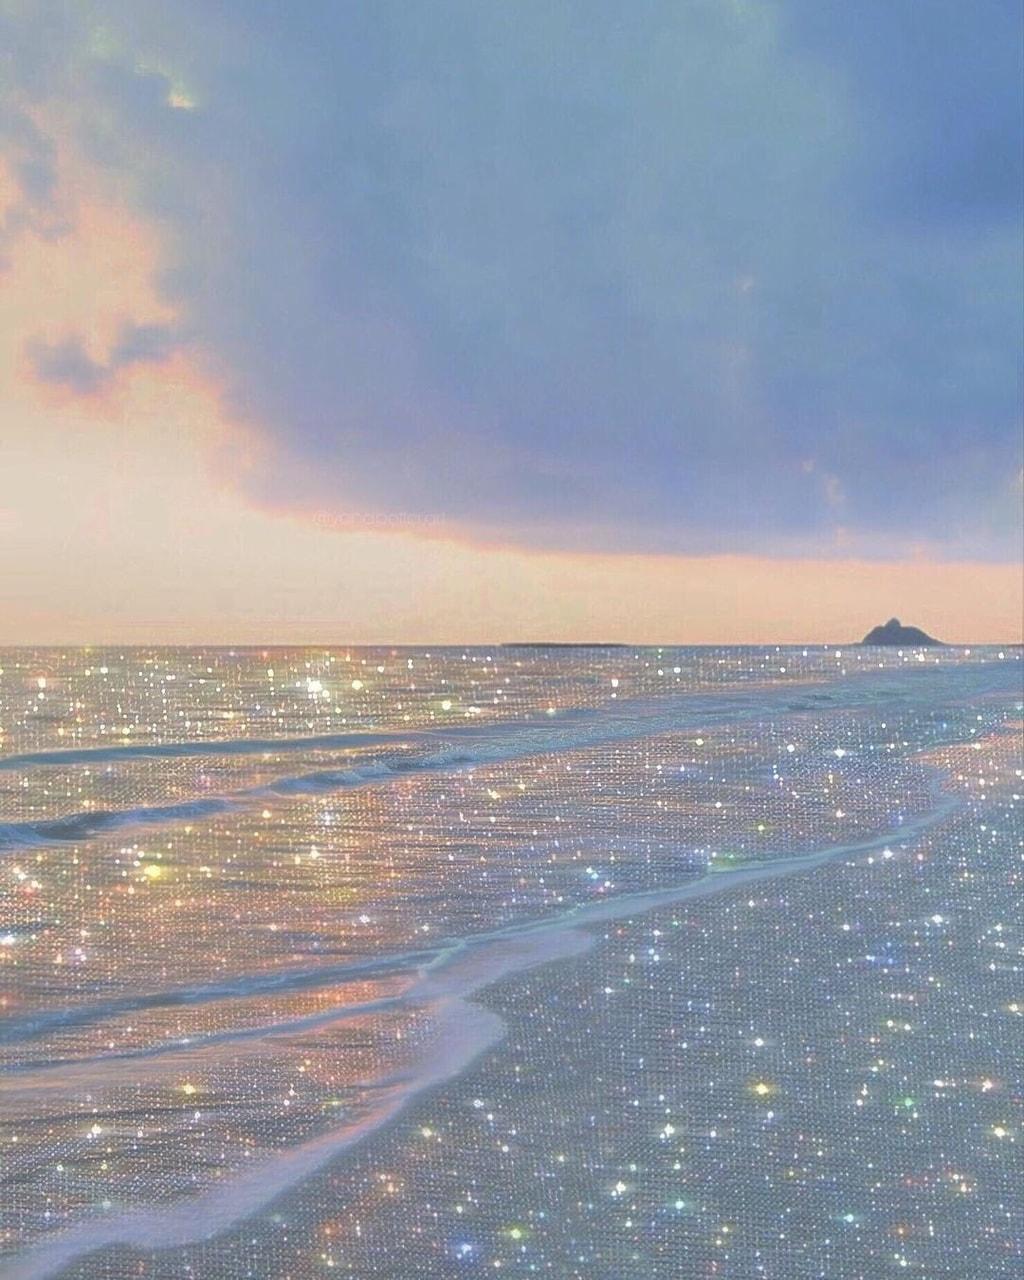 A beach with sparkling water and clouds - Bling, glitter